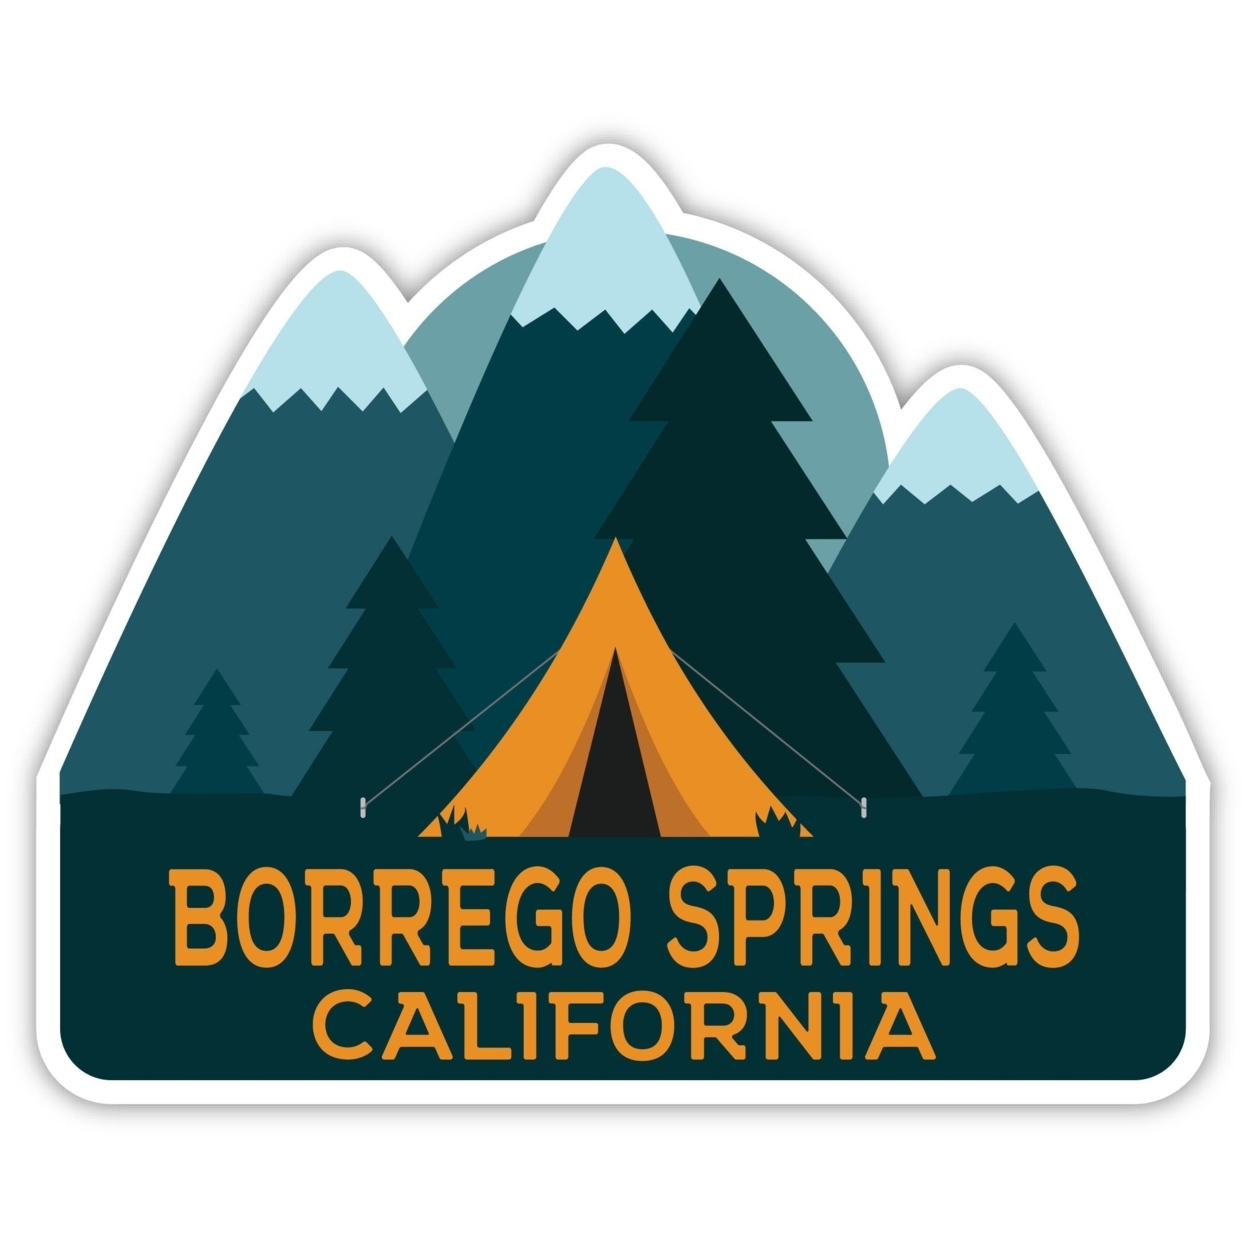 Borrego Springs California Souvenir Decorative Stickers (Choose Theme And Size) - 4-Pack, 4-Inch, Camp Life